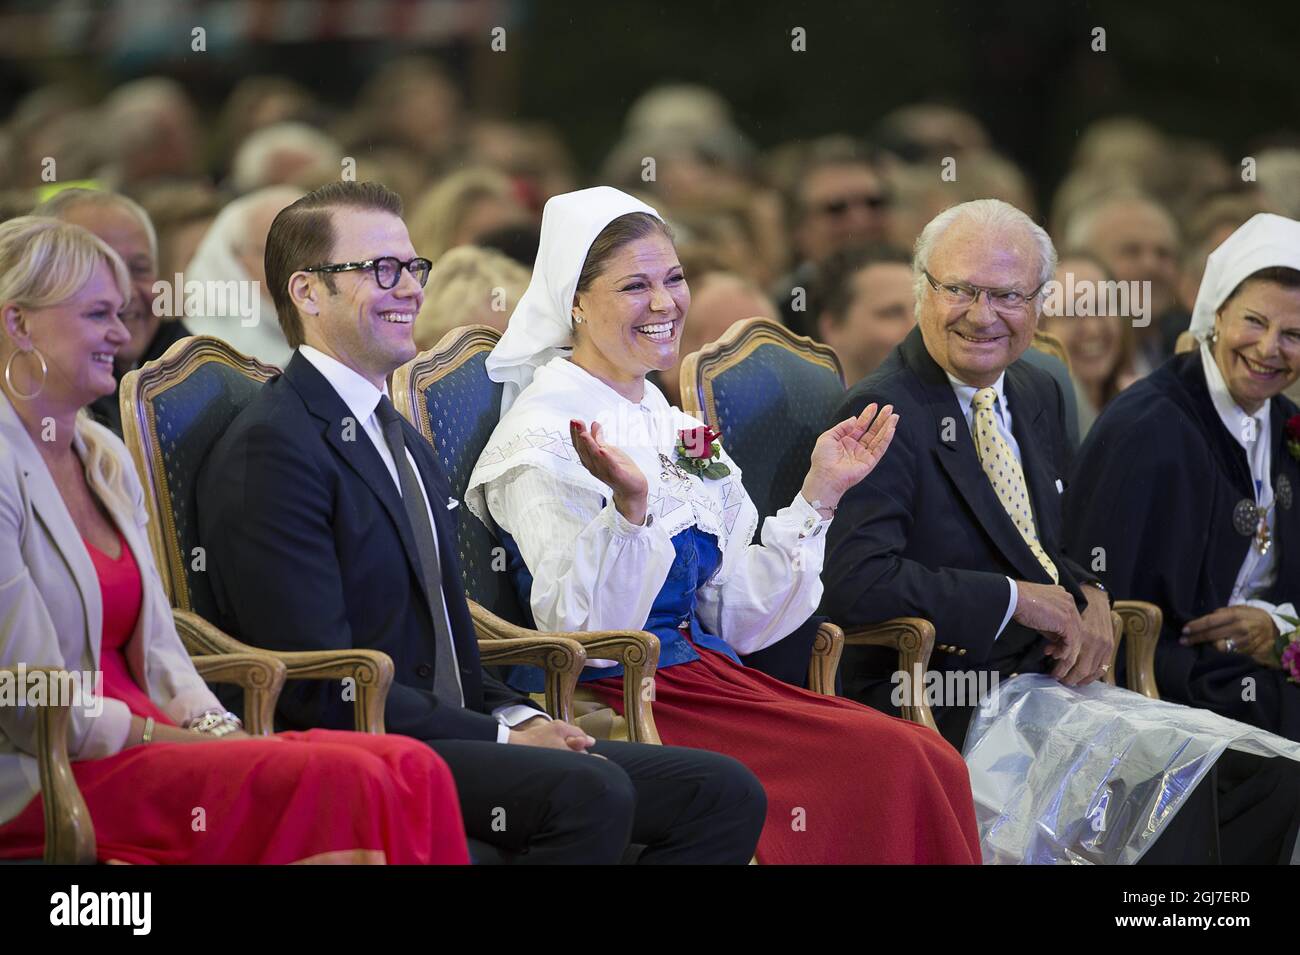 BORGHOLM 20120714 L-R: Curling player Anette Norberg, 2012 Victoria scholarship winner, Prince Daniel, Crown Princess Victoria, King Carl Gustaf and Queen Silvia during the celebrations of Crown Princess Victoria's 35th birthday on Saturday evening, in the city of Borgholm, on the island of Oland, where artists performed and Victoria handed out the annual Victoria scholarship.  Photo Jonas Ekstromer / SCANPIX code 10030  Stock Photo